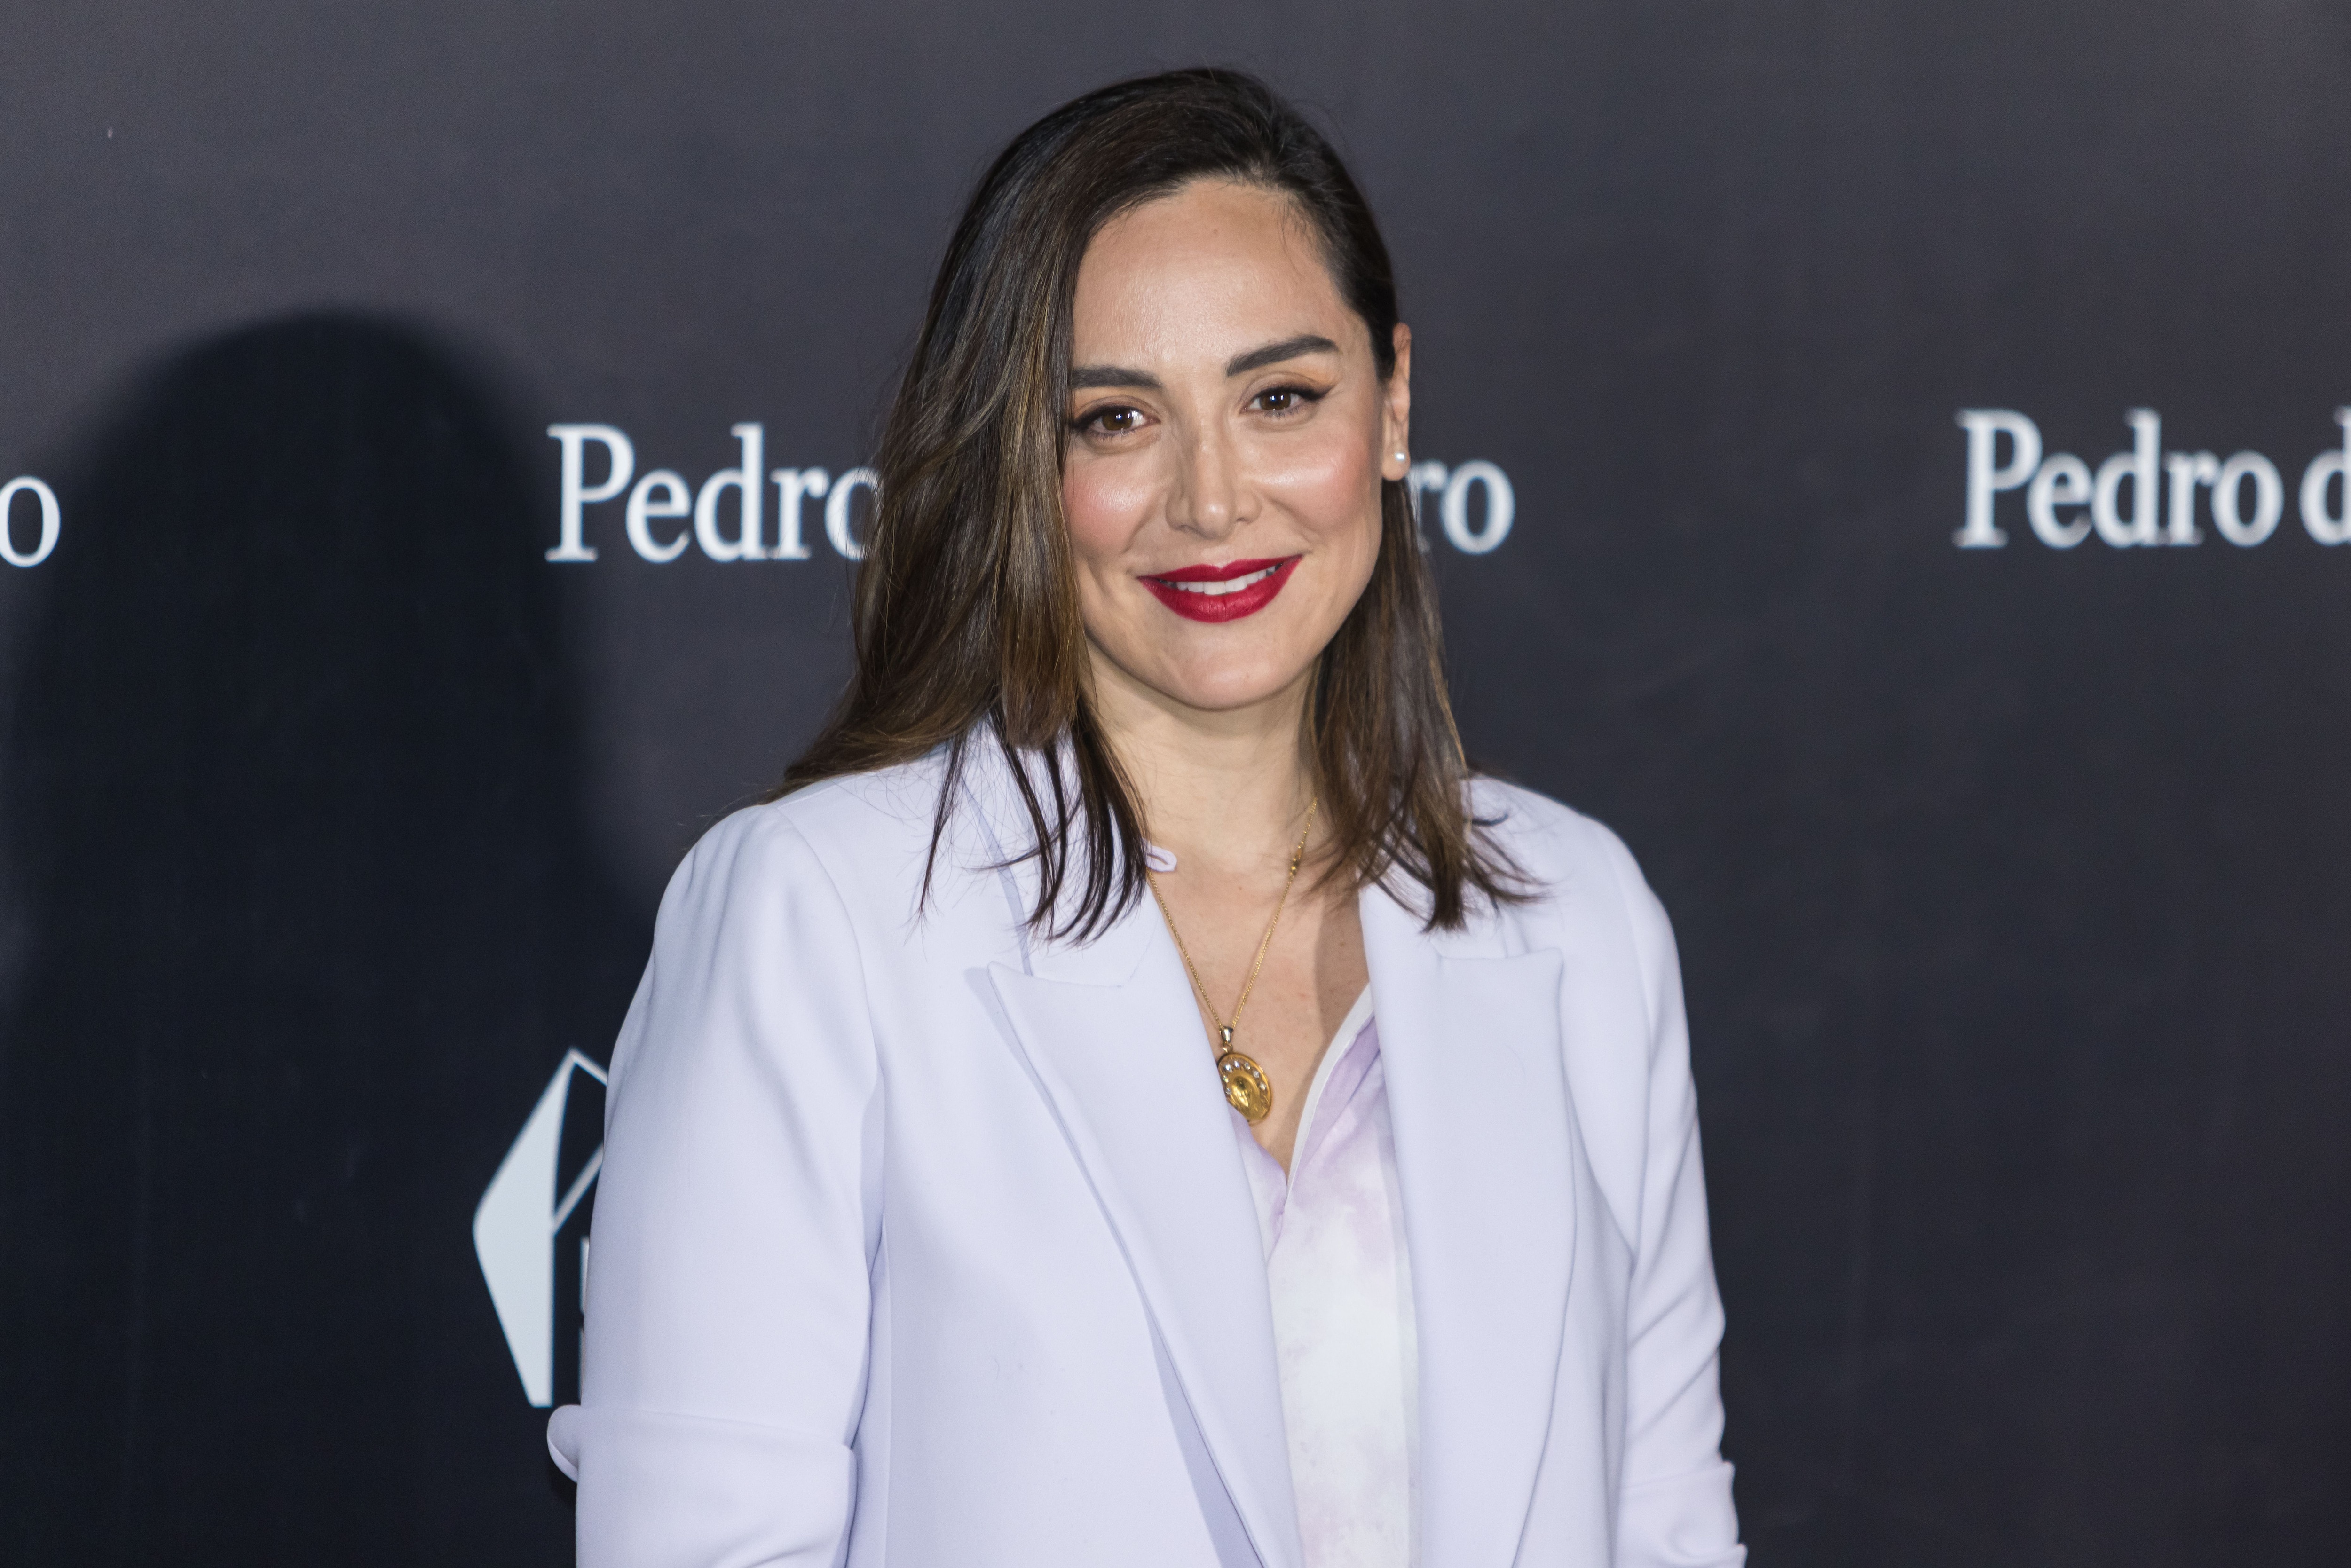 MADRID, SPAIN - FEBRUARY 16: Tamara Falco attends the photocall prior to the Pedro del Hierro fashion show during the  Mercedes Benz Fashion Week Madrid February 2023 edition at IFEMA on February 16, 2023 in Madrid, Spain. (Photo by David Benito/WireImage)